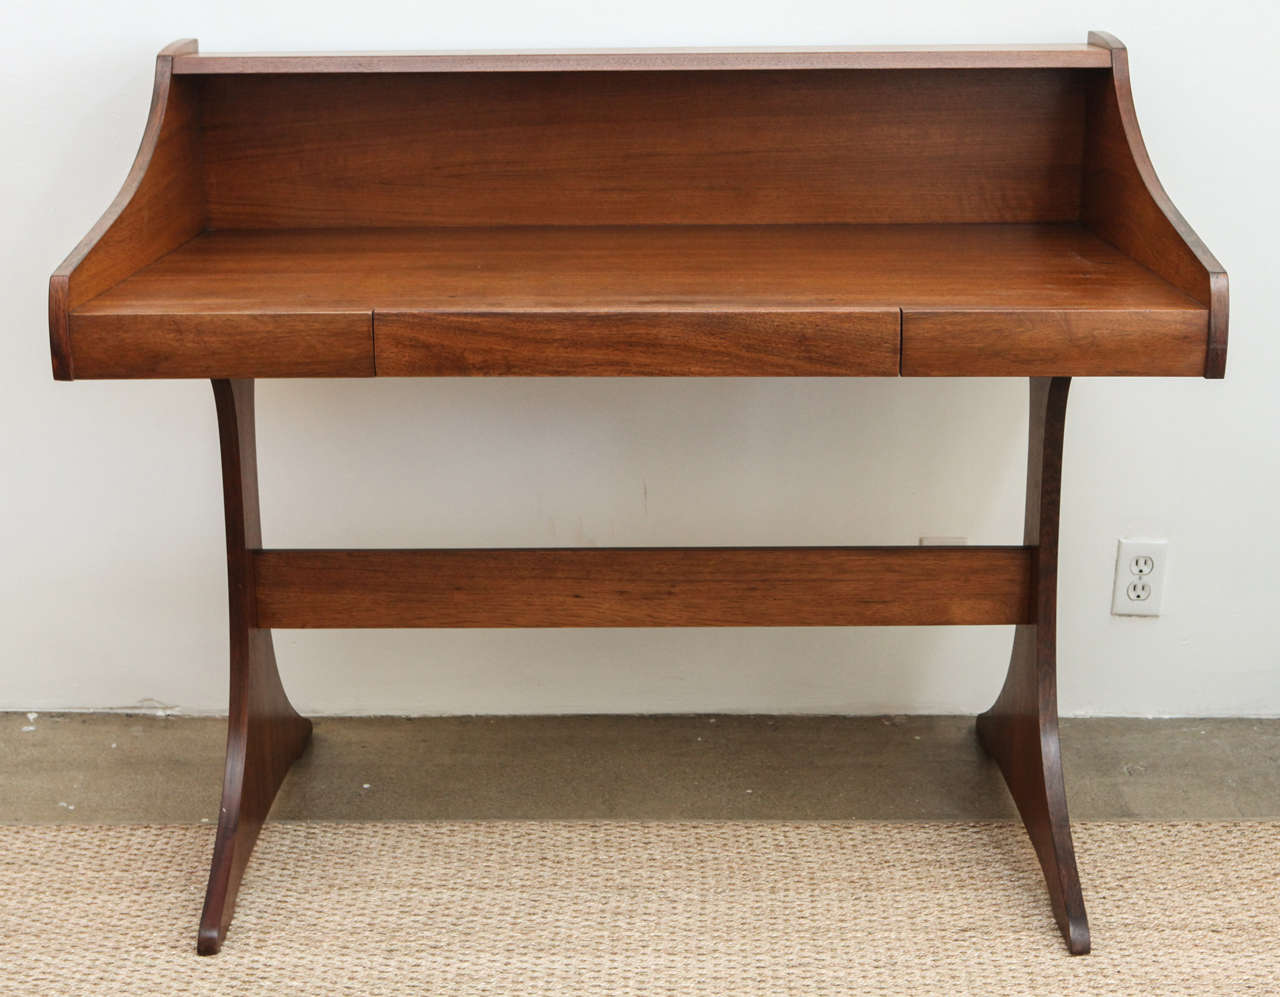 This 1970s solid walnut desk, made by Kroehler, features clean, minimalist lines evocative of pure mid-century style. The piece is entirely finished on the back and sides, so it can easily float in a room. The overall height is 39